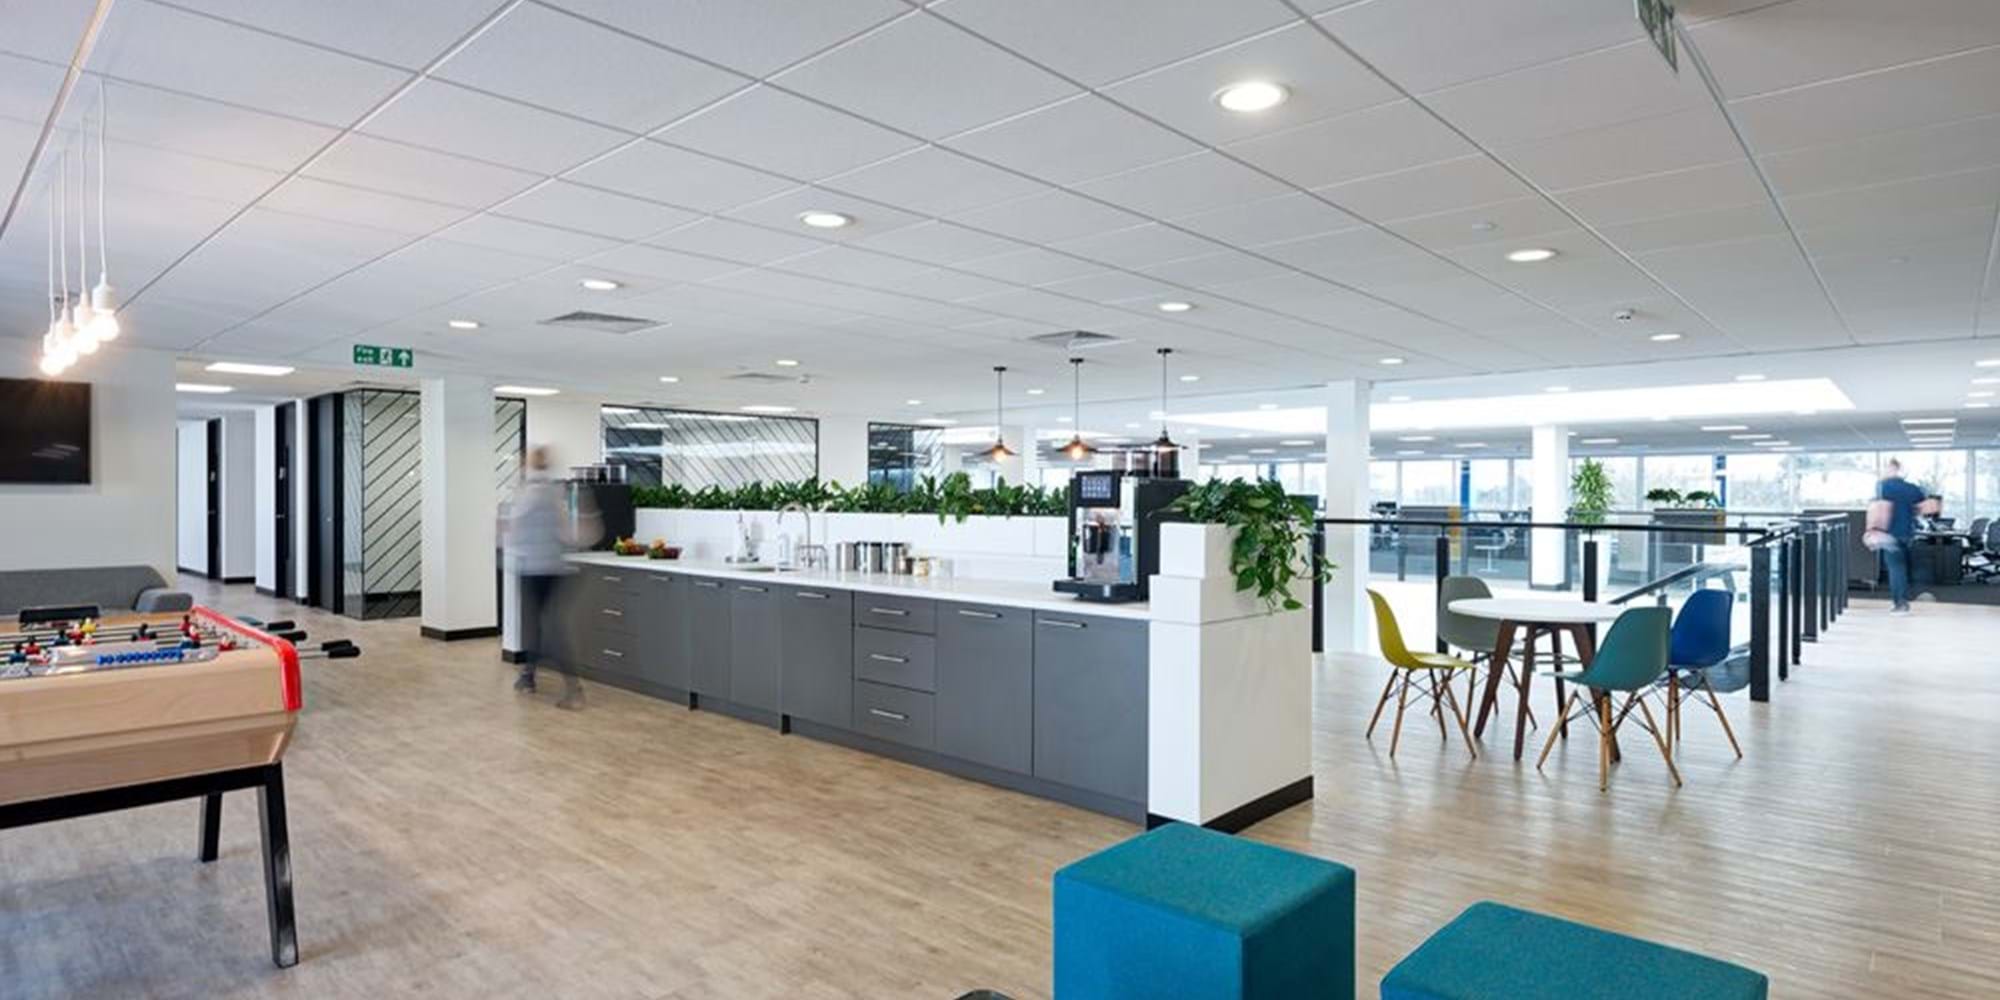 Modus Workspace office design, fit out and refurbishment - FT Technologies - FT Technologies 04 highres sRGB.jpg